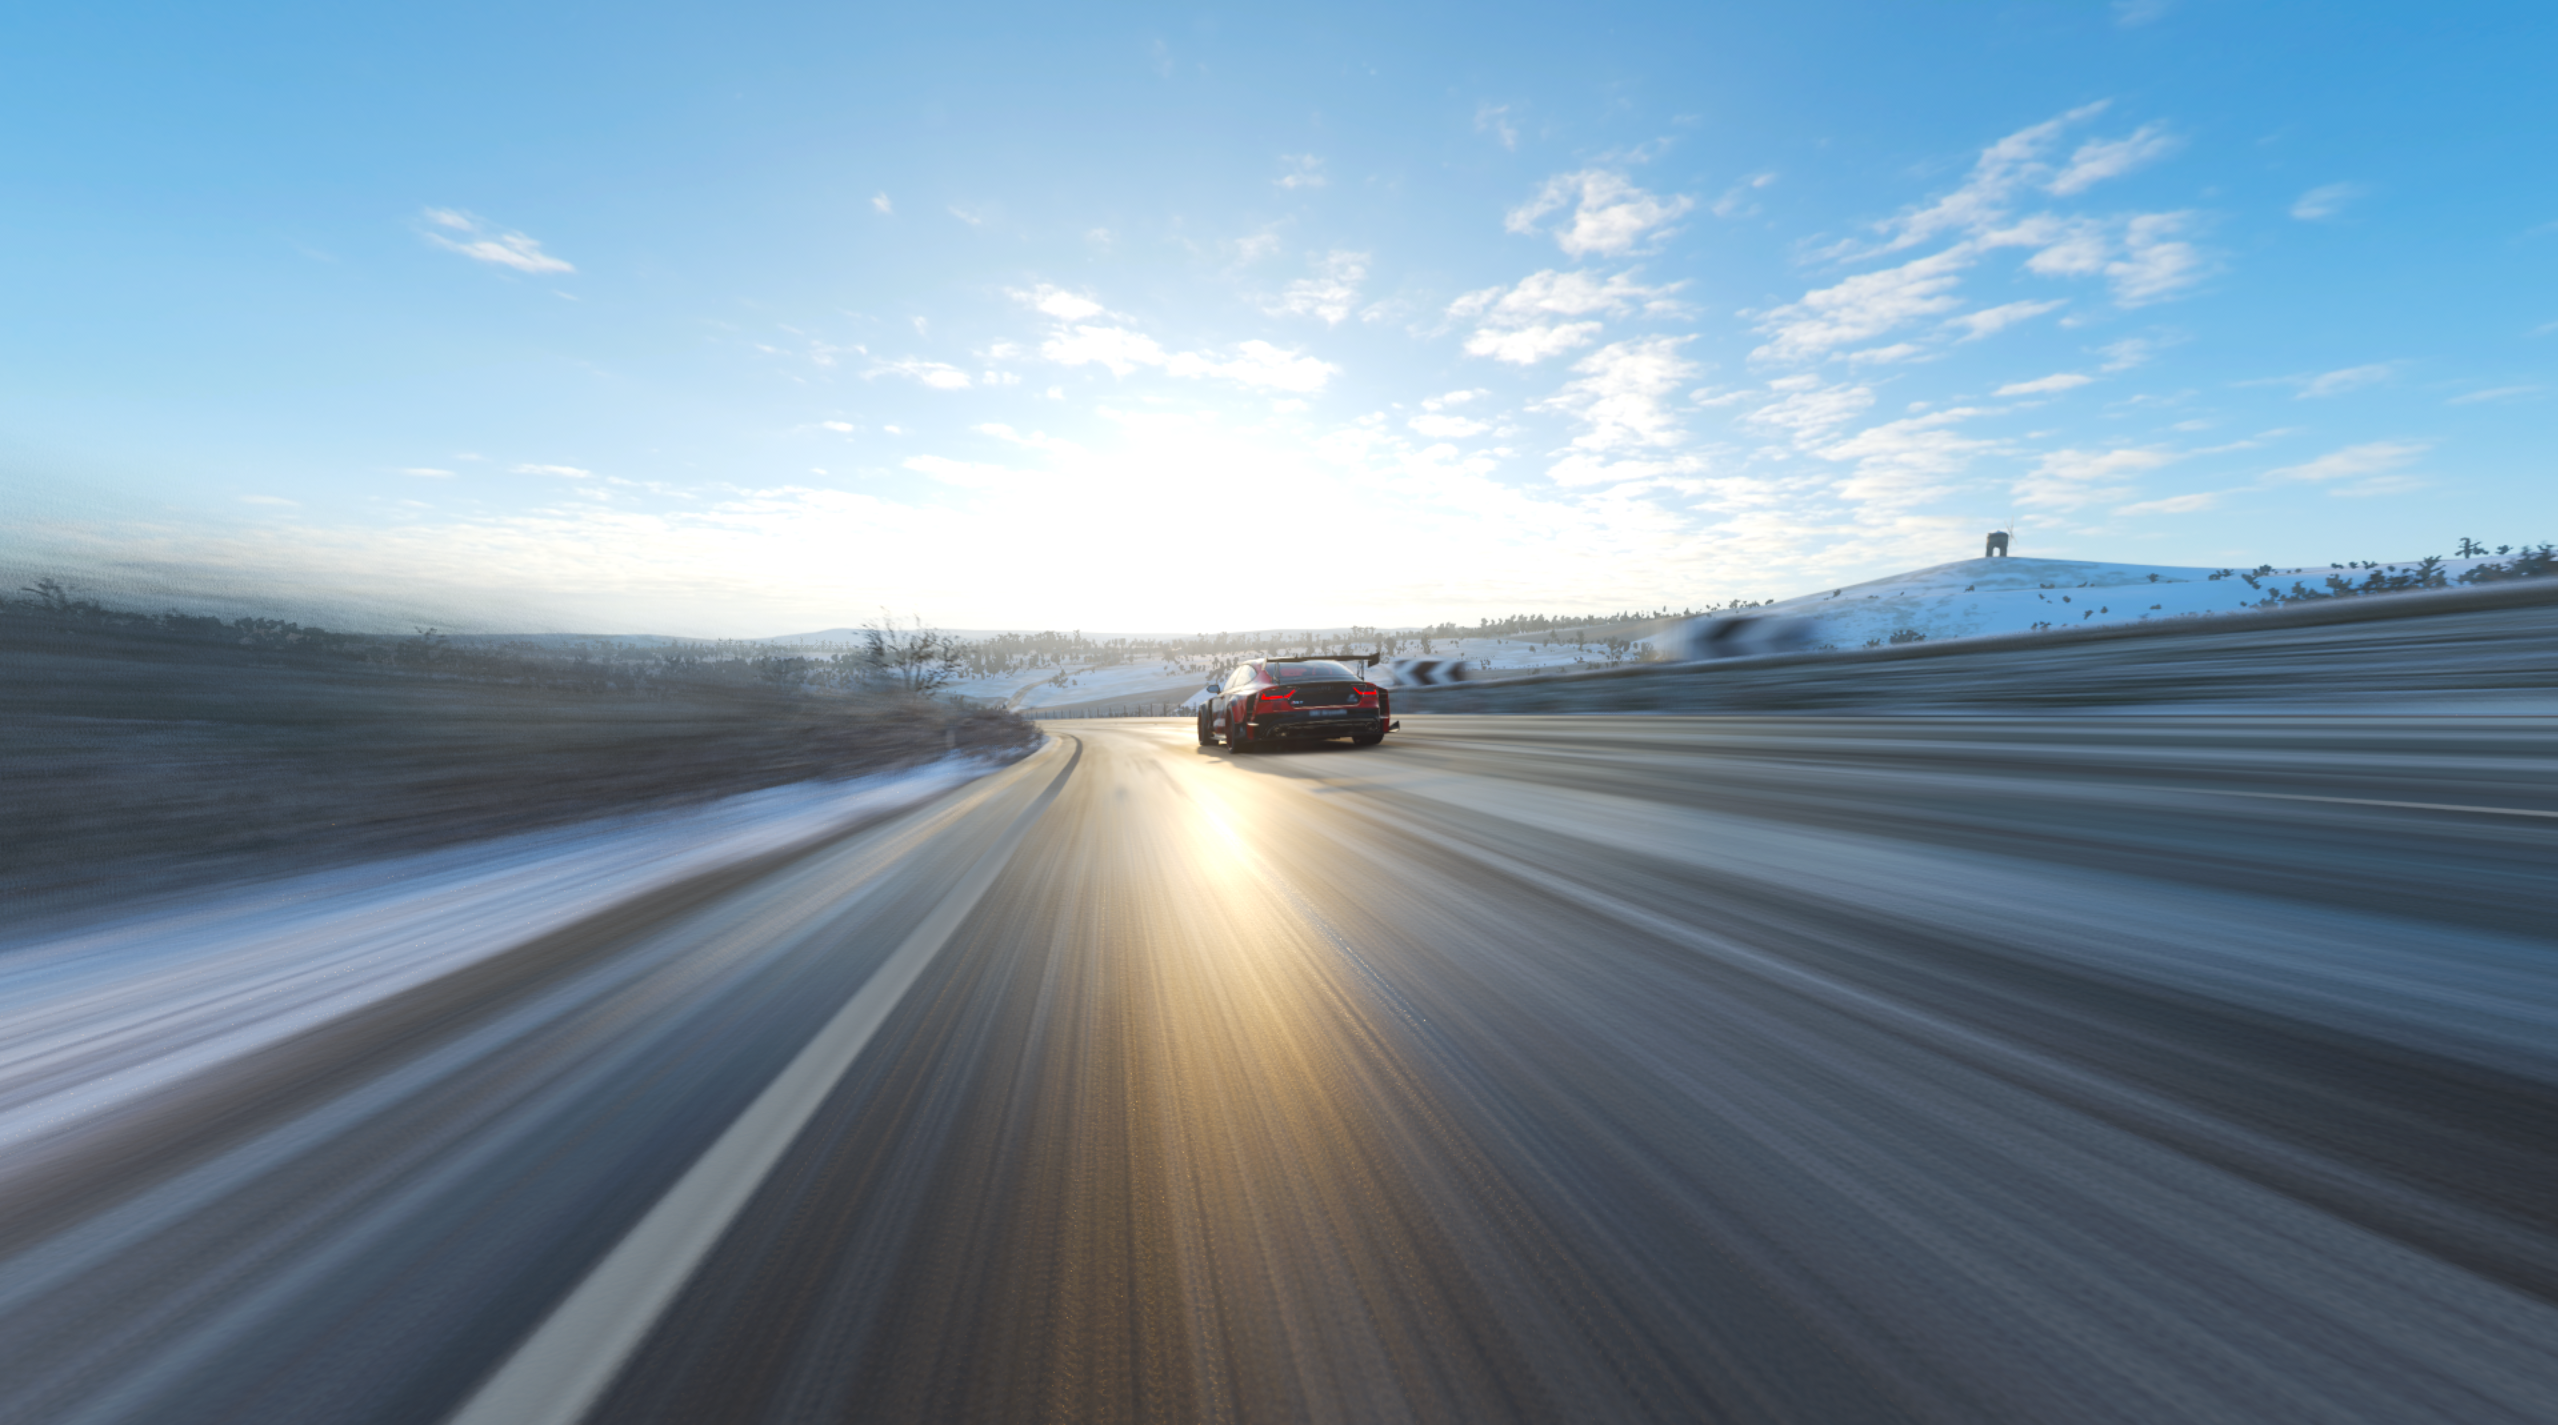 Horizon Speed Design Road Audi Taillights Snow Tracks Car Motion Blur Reflection Rear View Clouds Sk 2558x1425